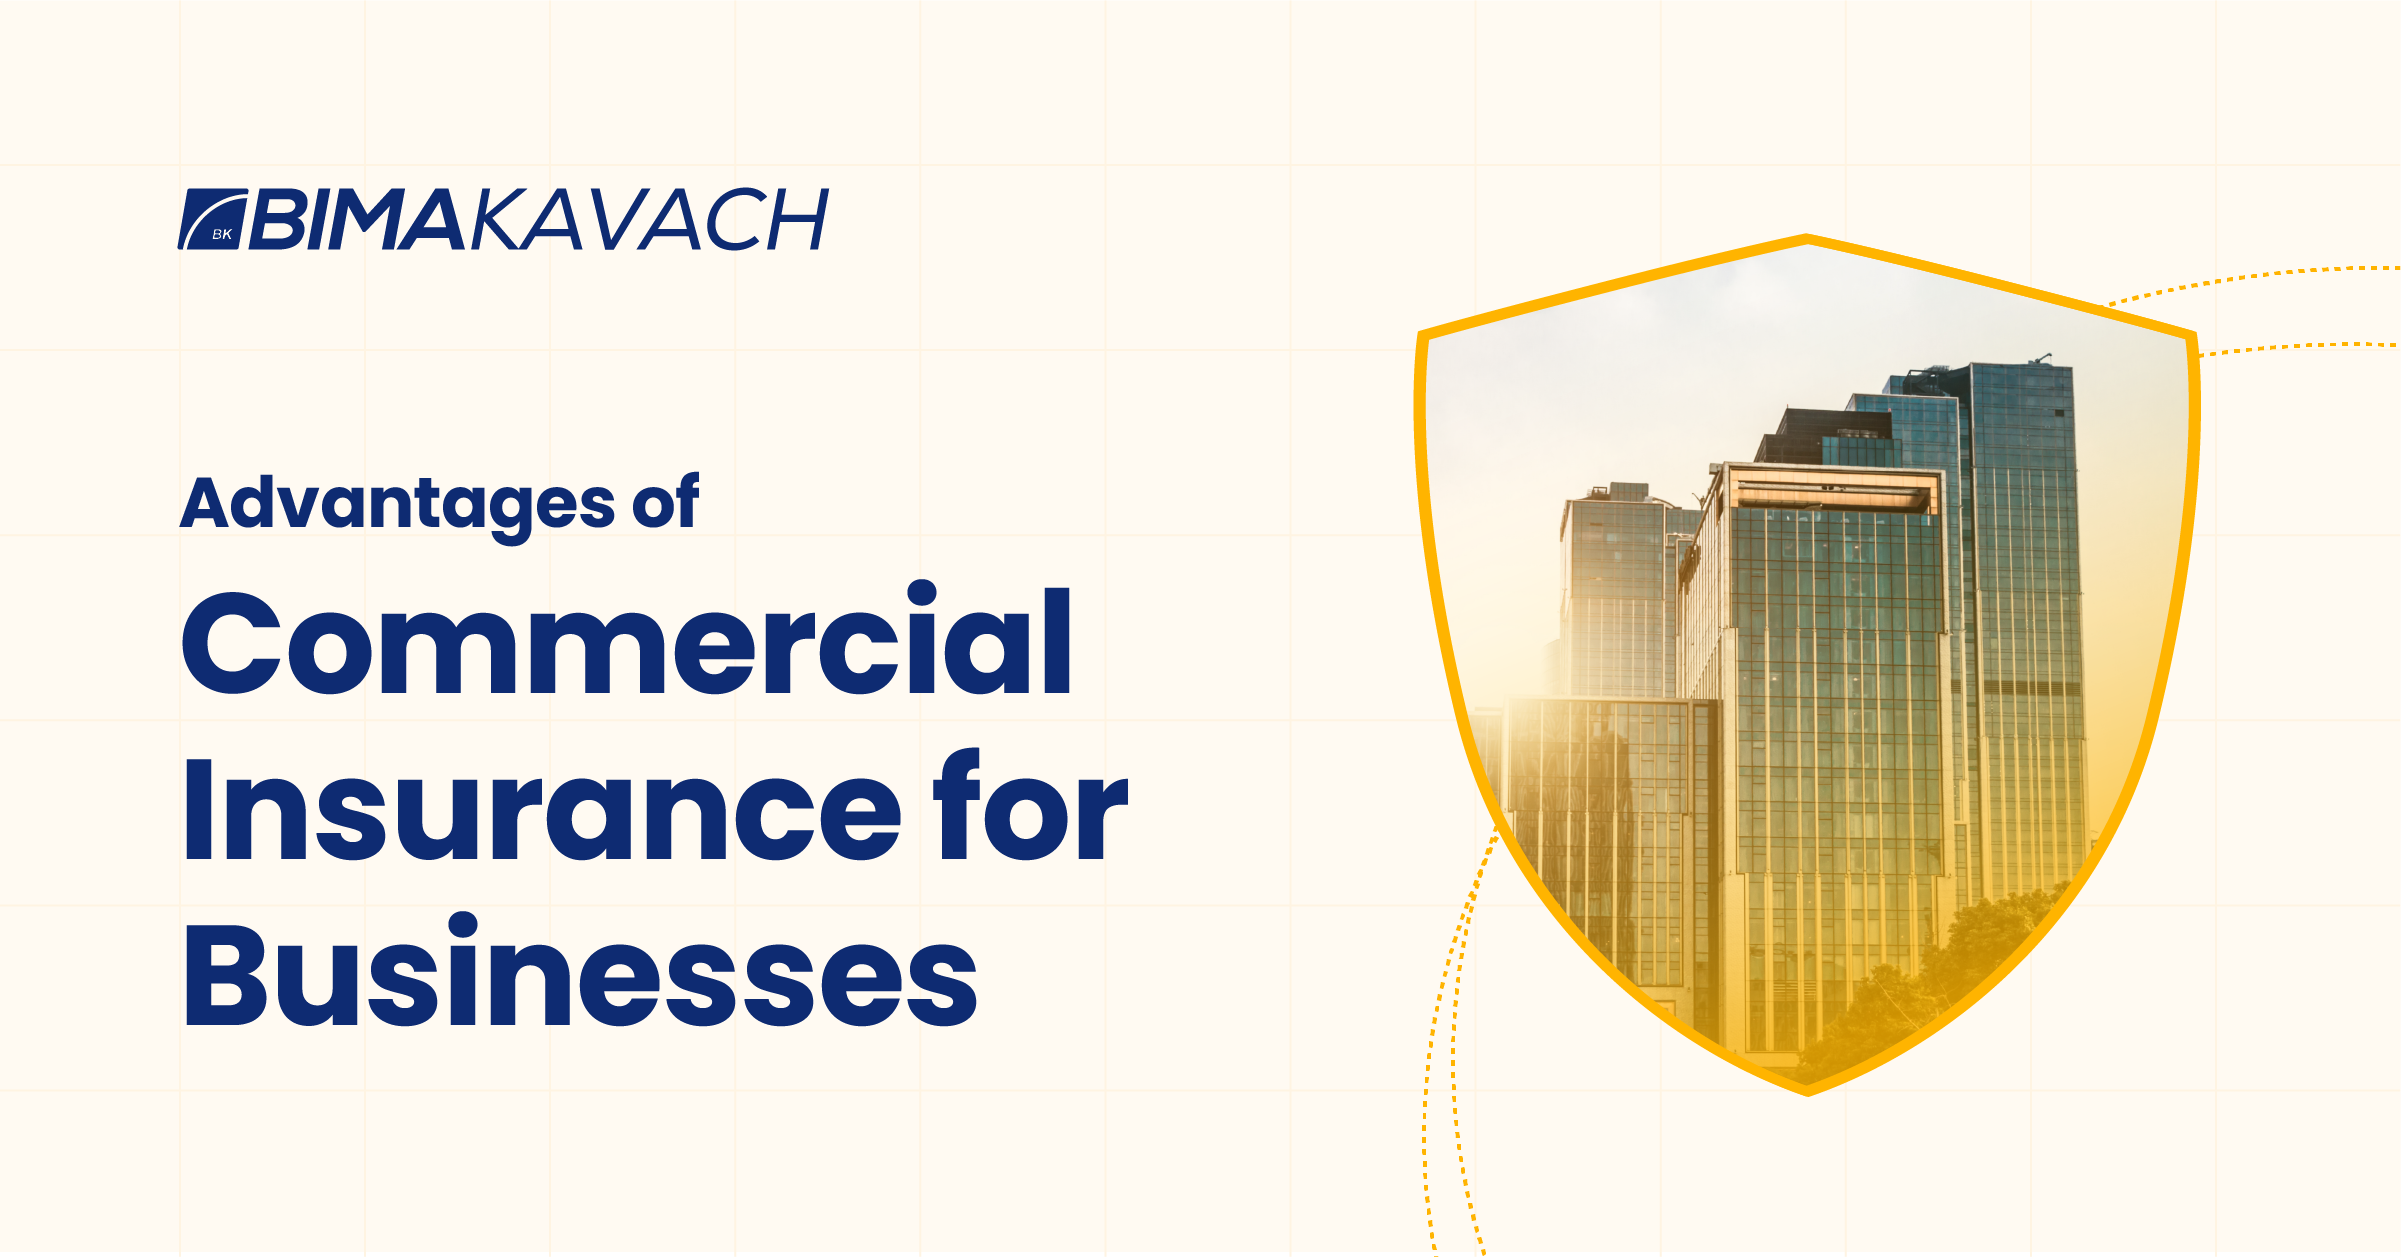 The Advantage of Commercial Insurance for Businesses